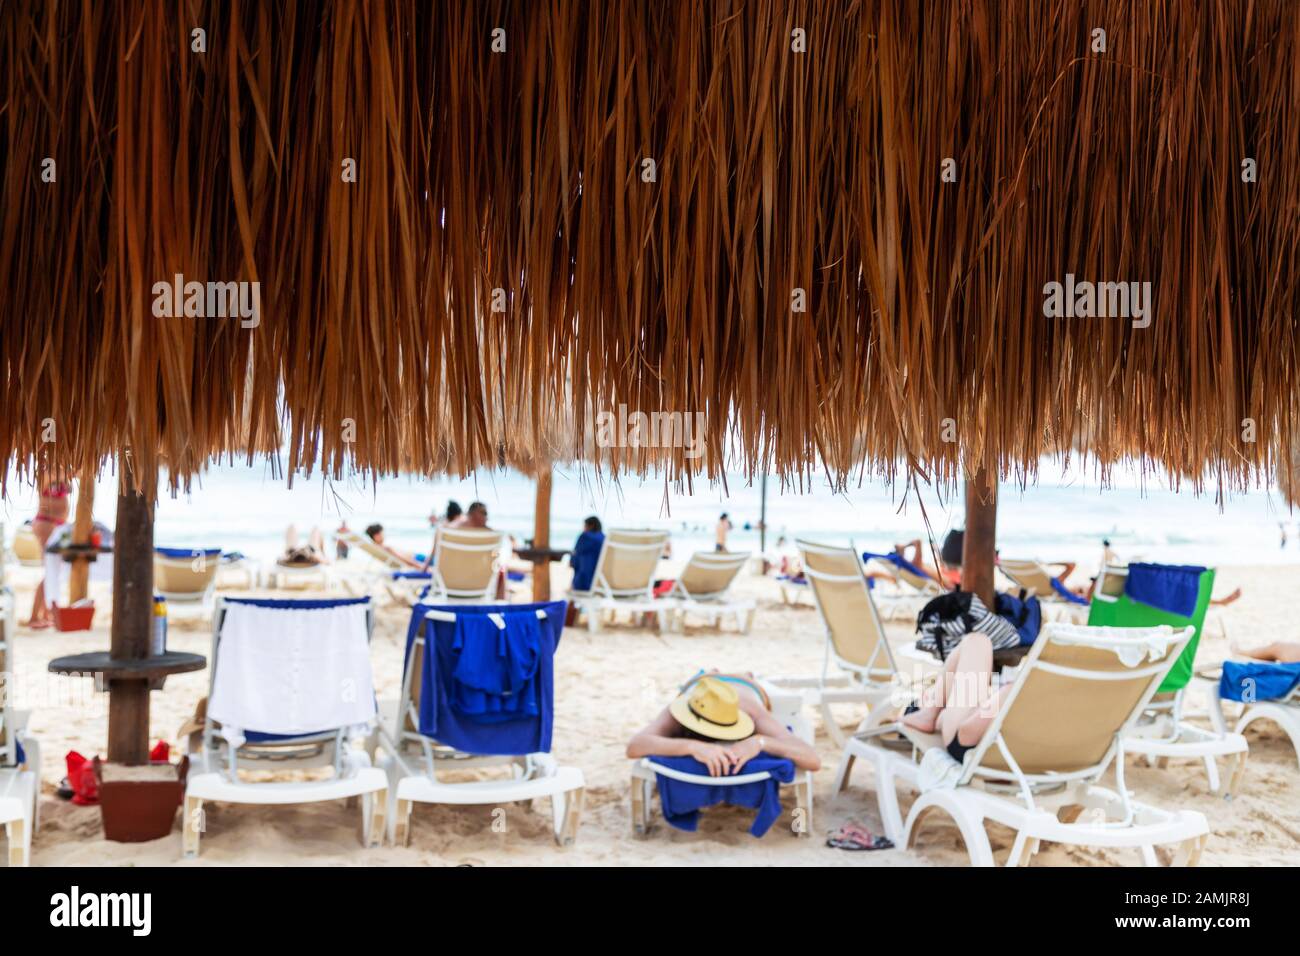 Close up of coconut palm leaf beach umbrella with beachgoers relaxing at a distance in a Cancun beach in Mexico. Stock Photo